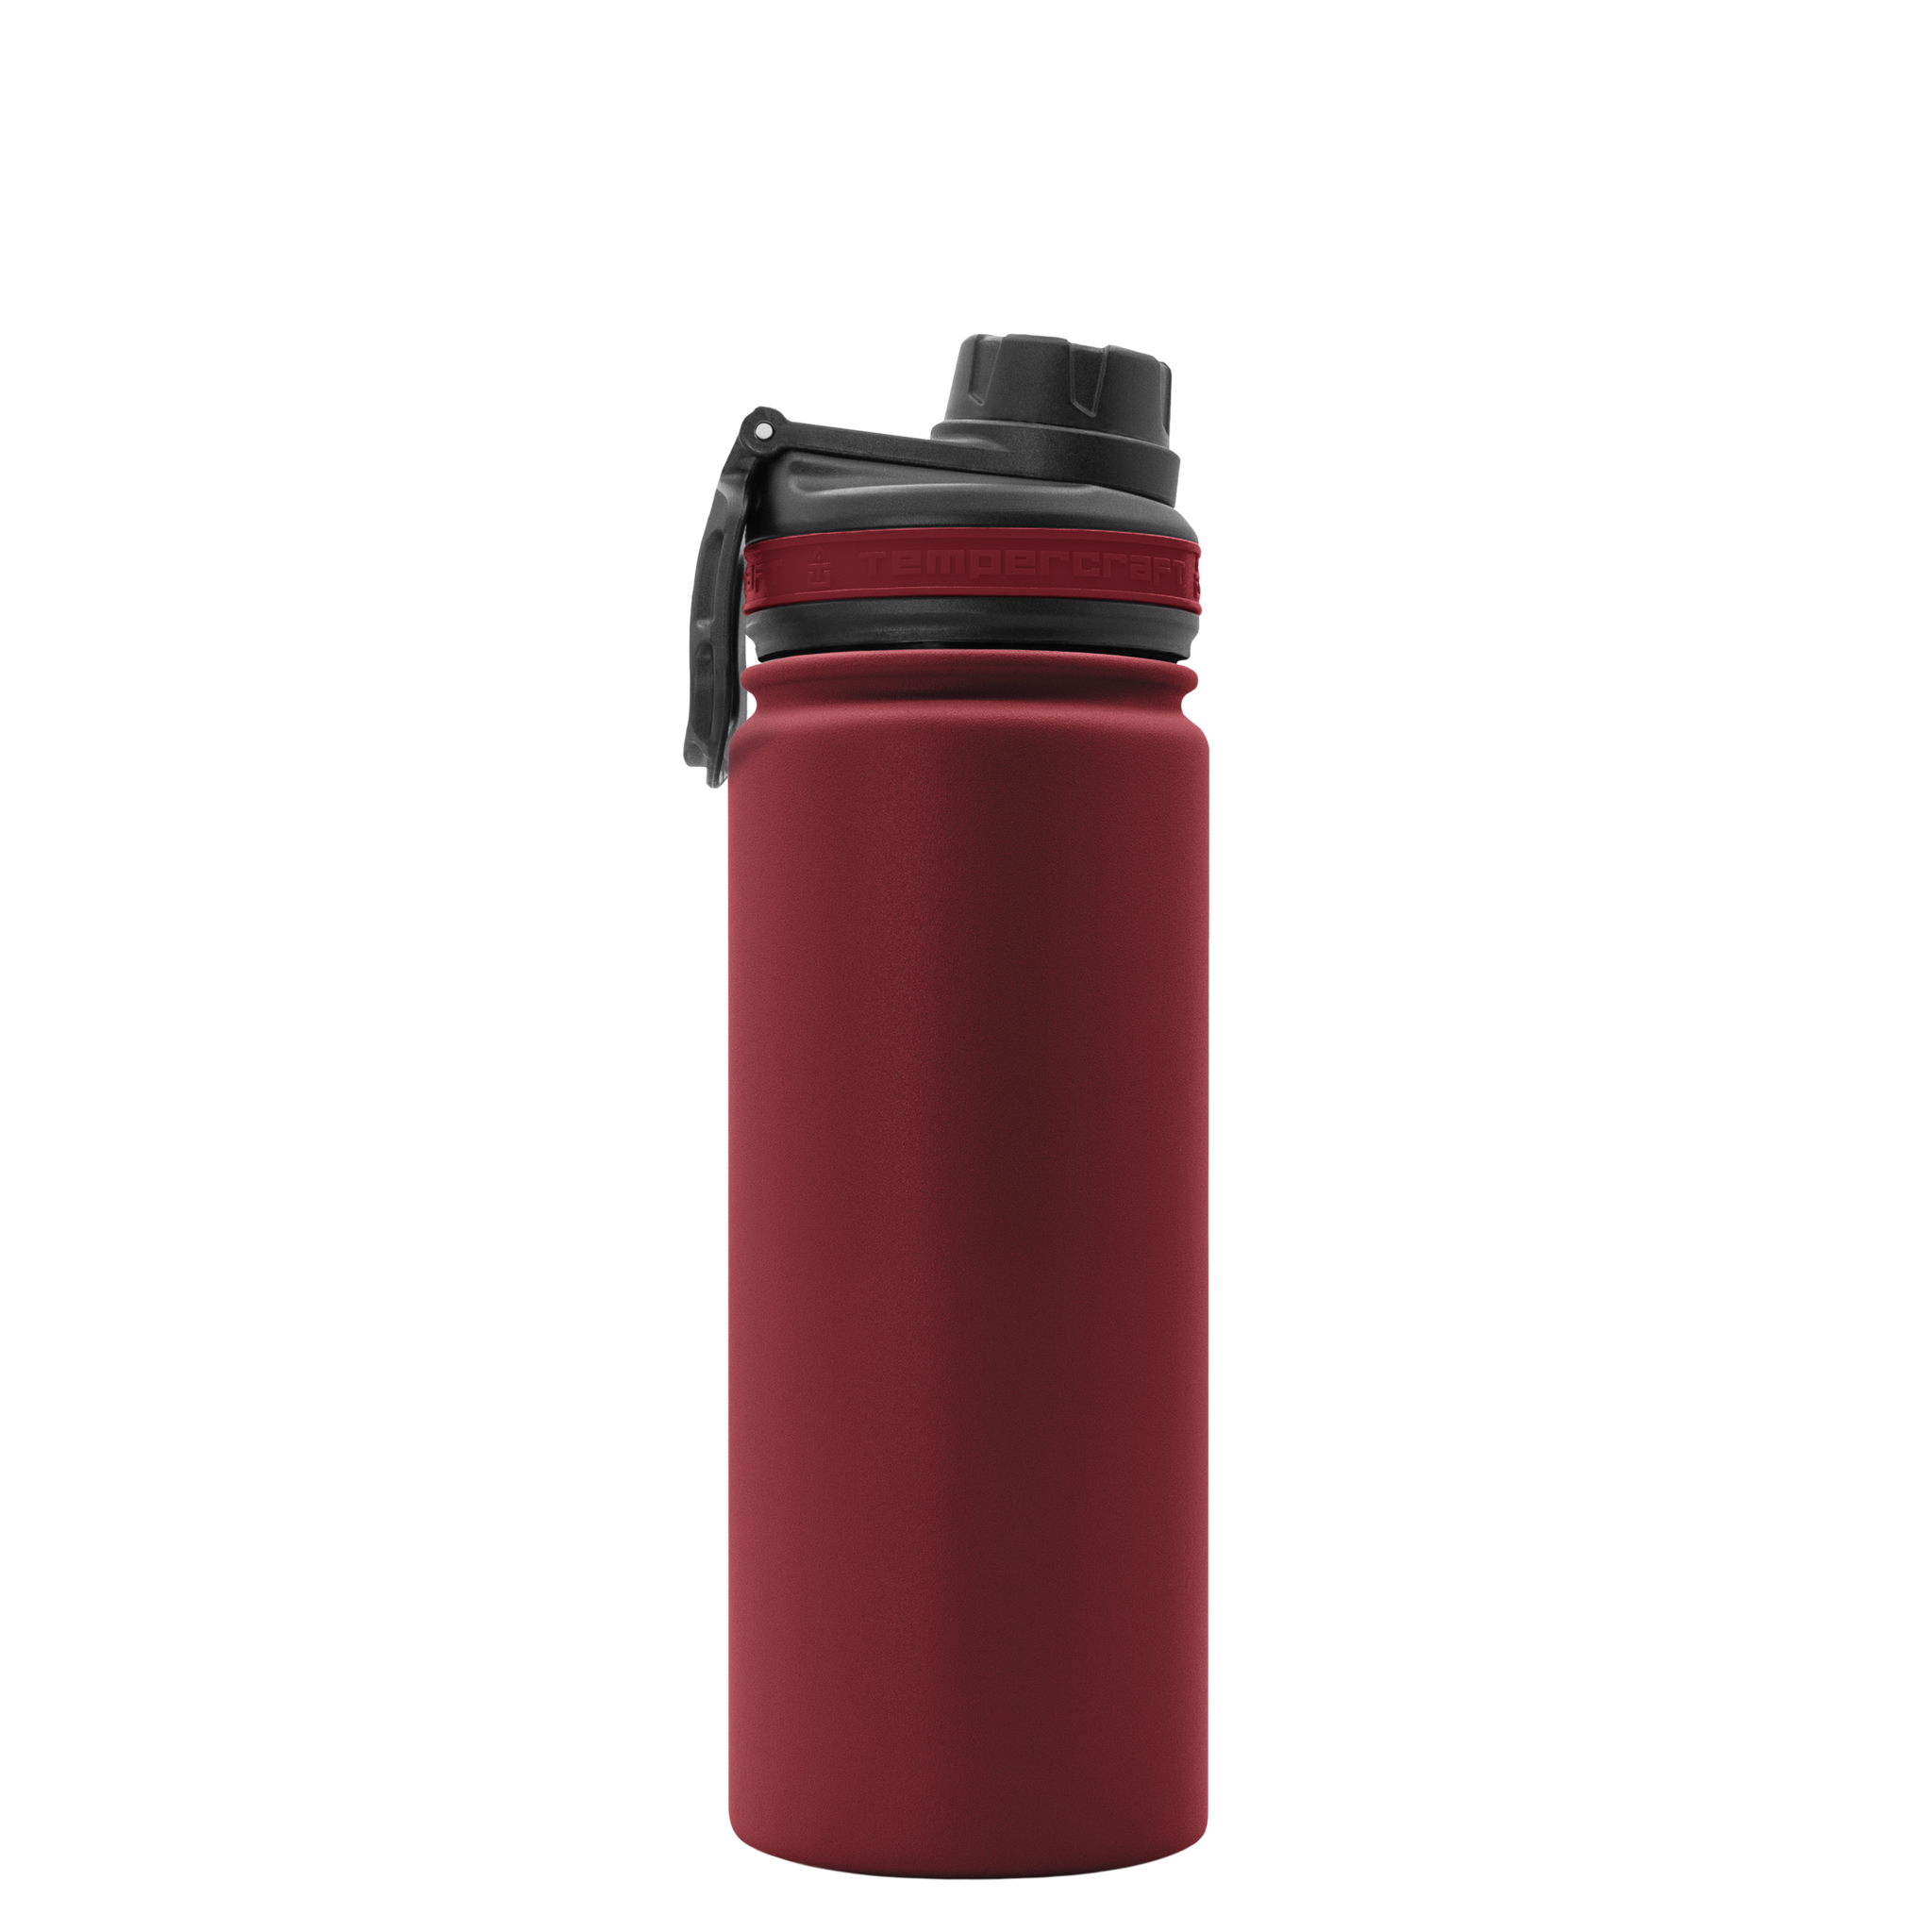  18oz Water Bottle,Vacuum Insulated Stainless Steel